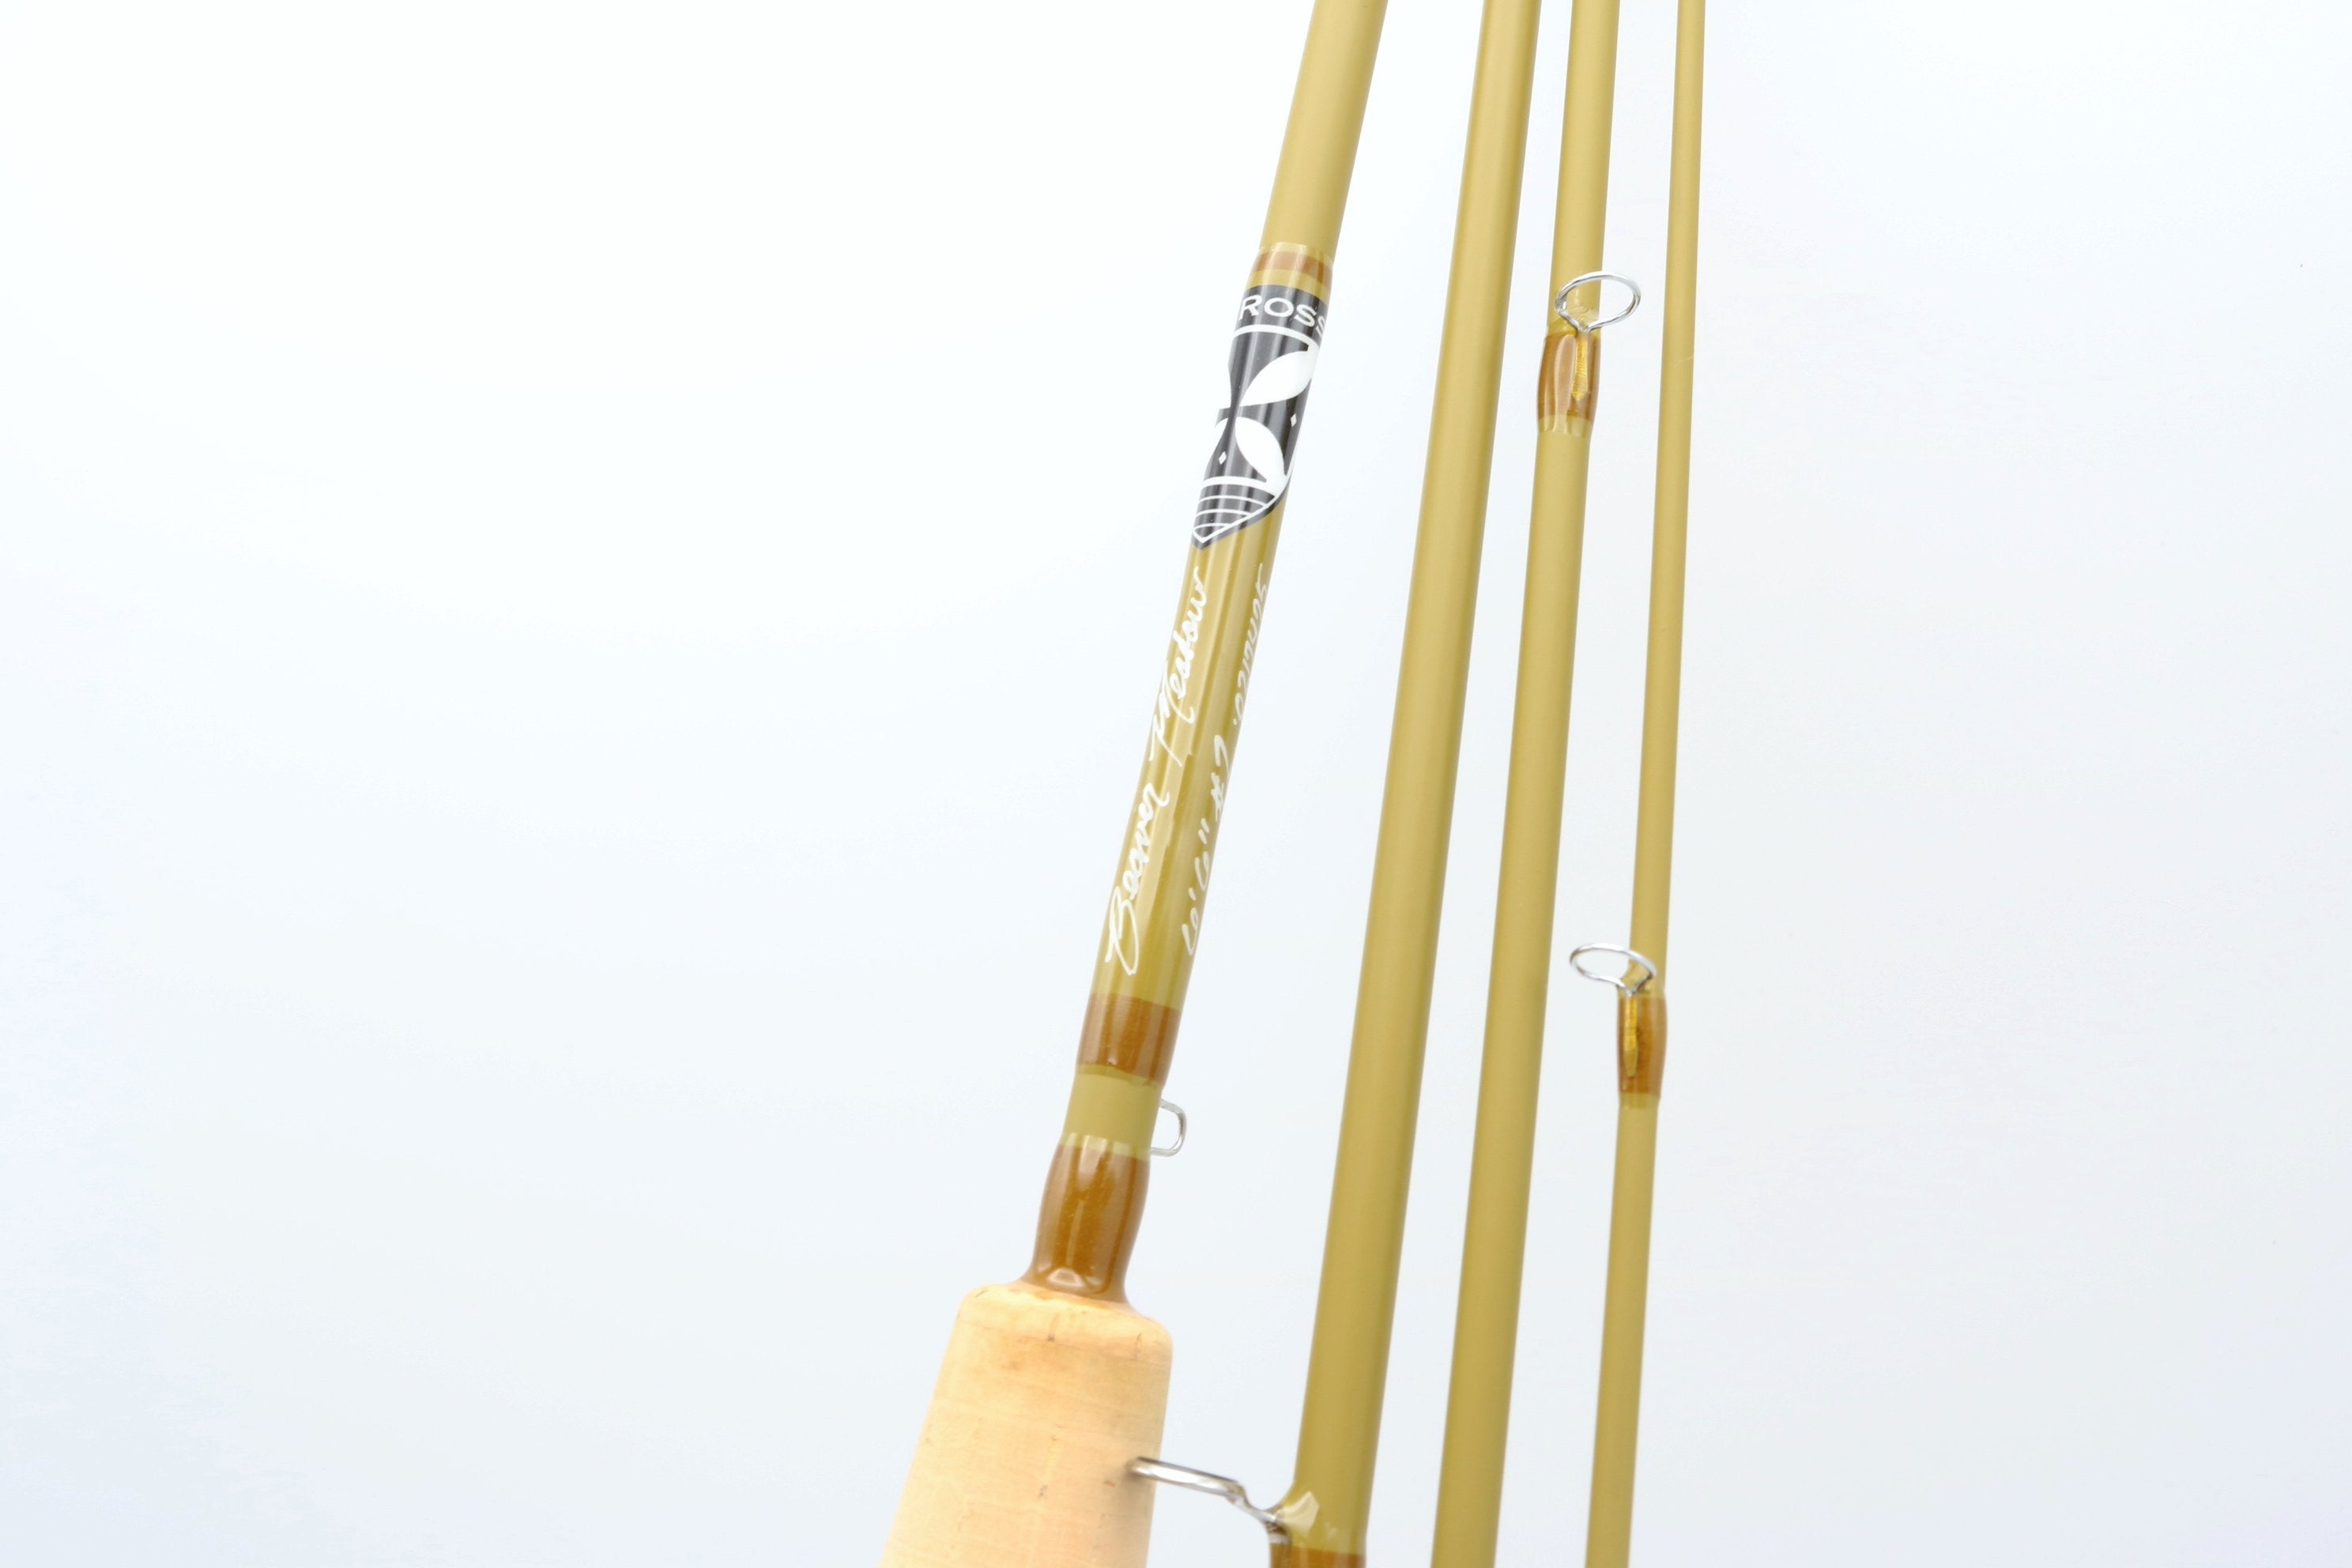 Beaver Meadow S-Glass Adams Rod and Outfit